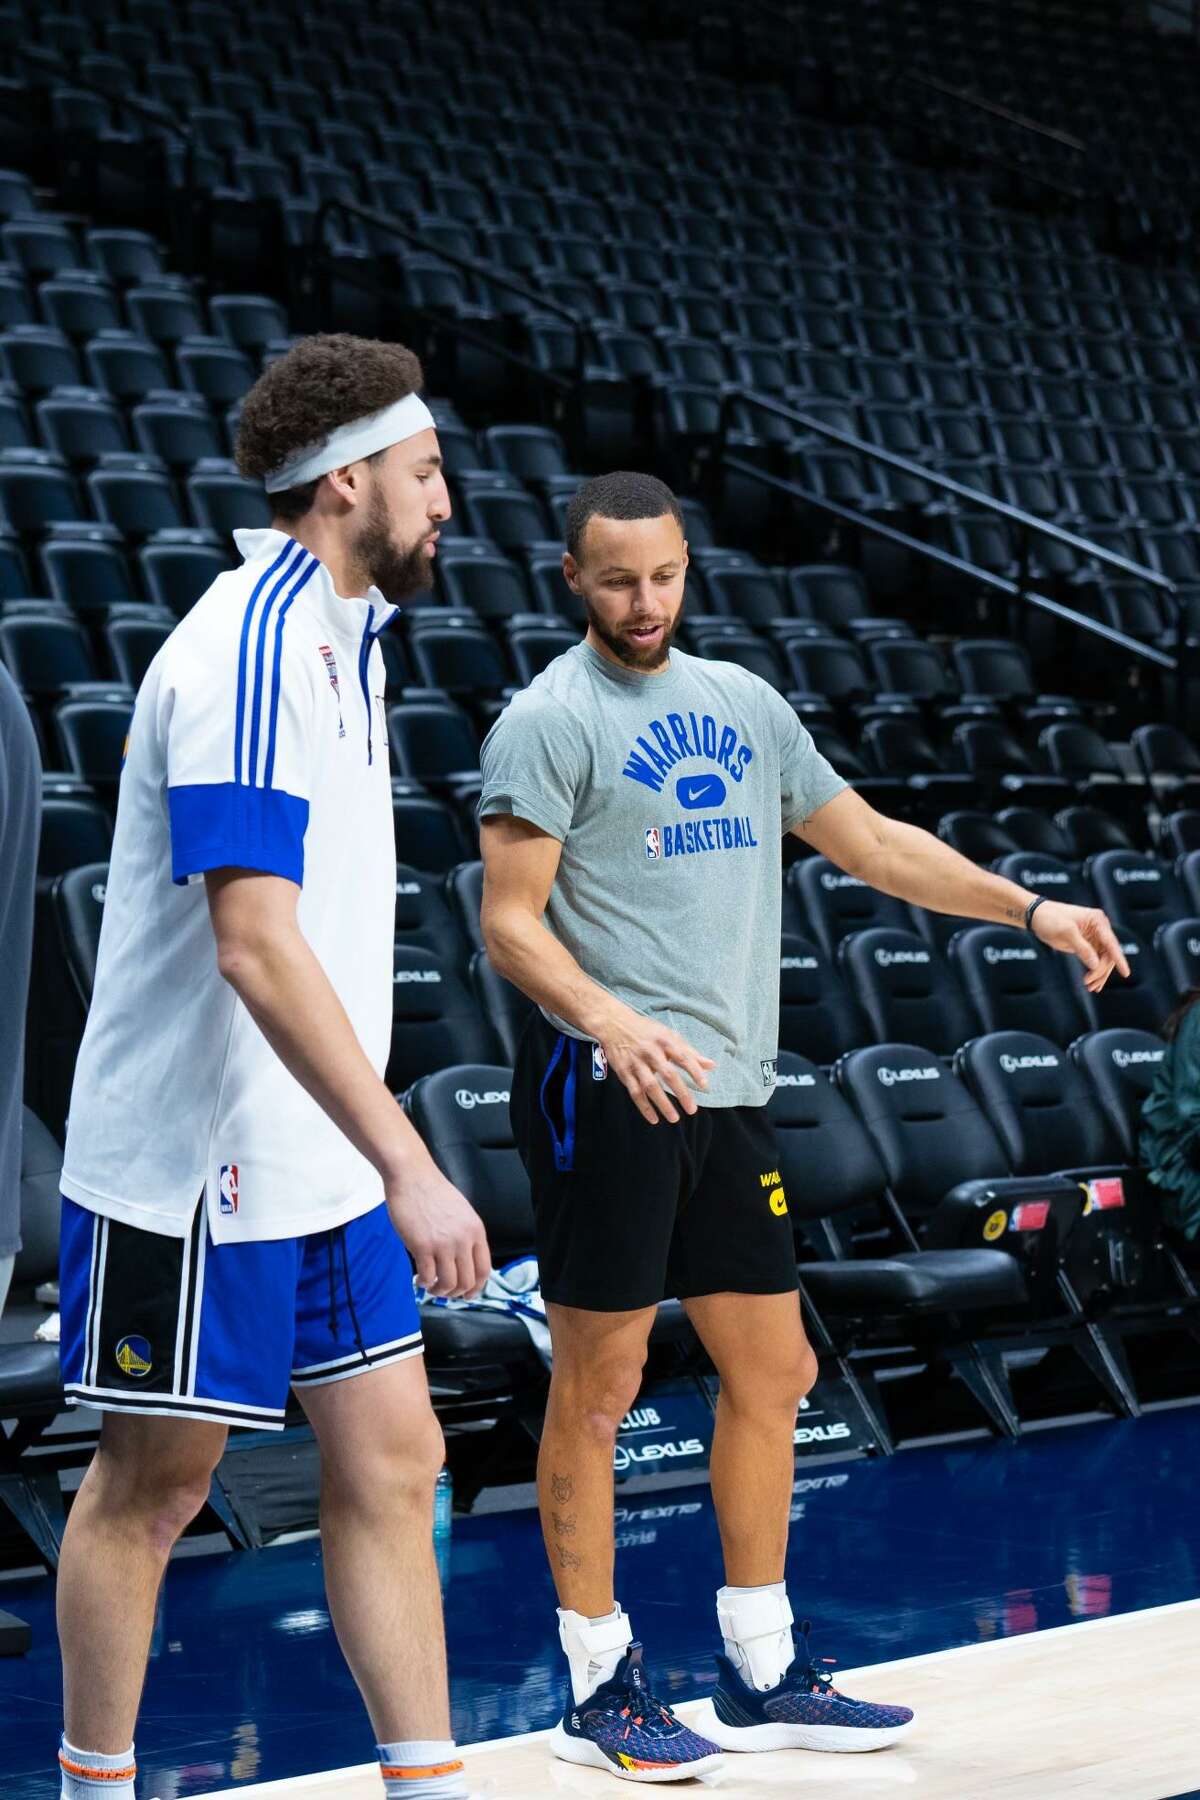 Golden State Warriors guards Klay Thompson, left, and Stephen Curry participate in practice at Ball Arena in Denver, Colorado on Thursday, December 30, 2021.